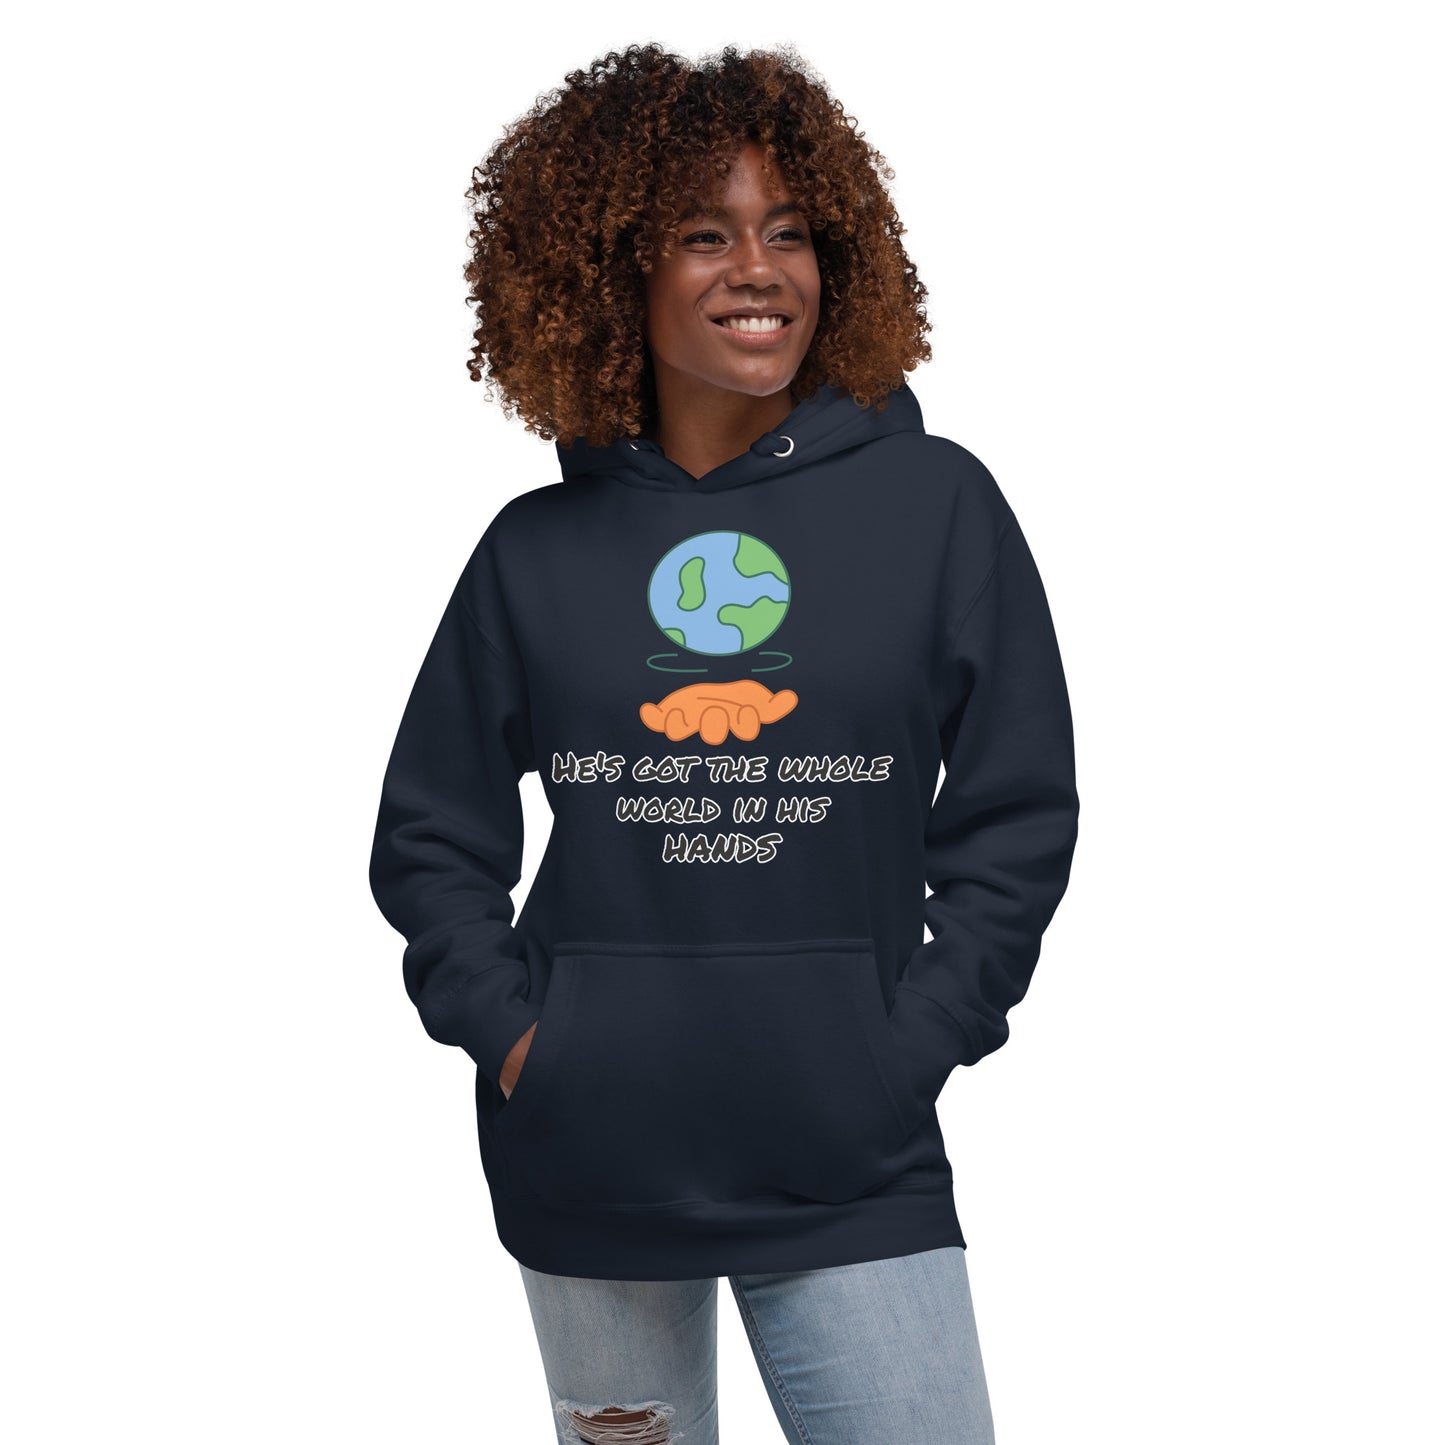 He's Got The Whole World In His Hands Unisex Hoodie